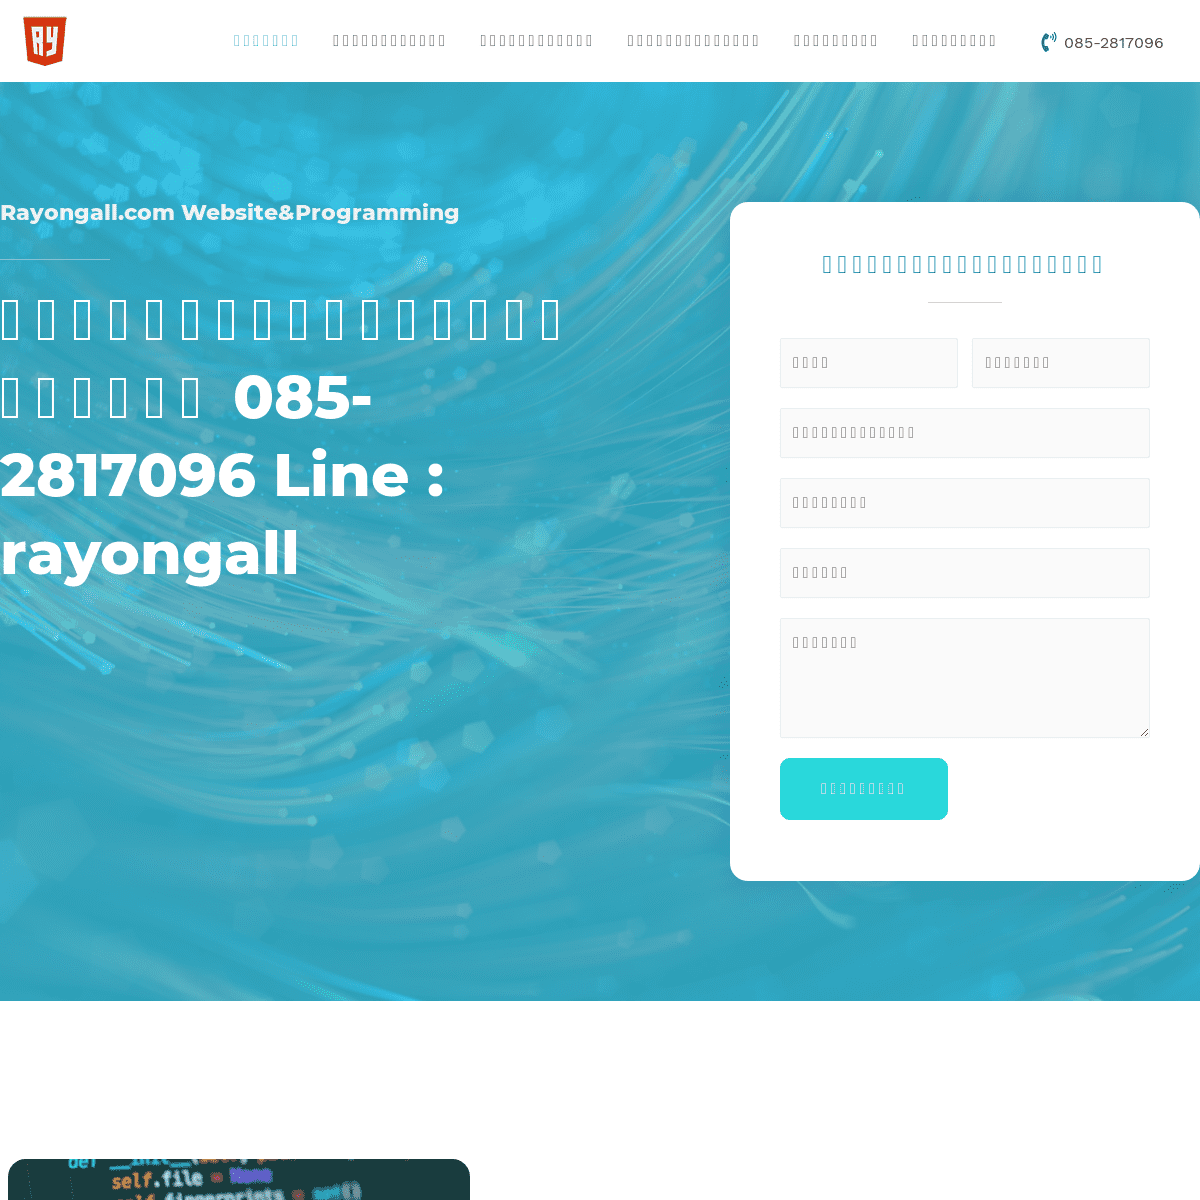 A complete backup of rayongall.com